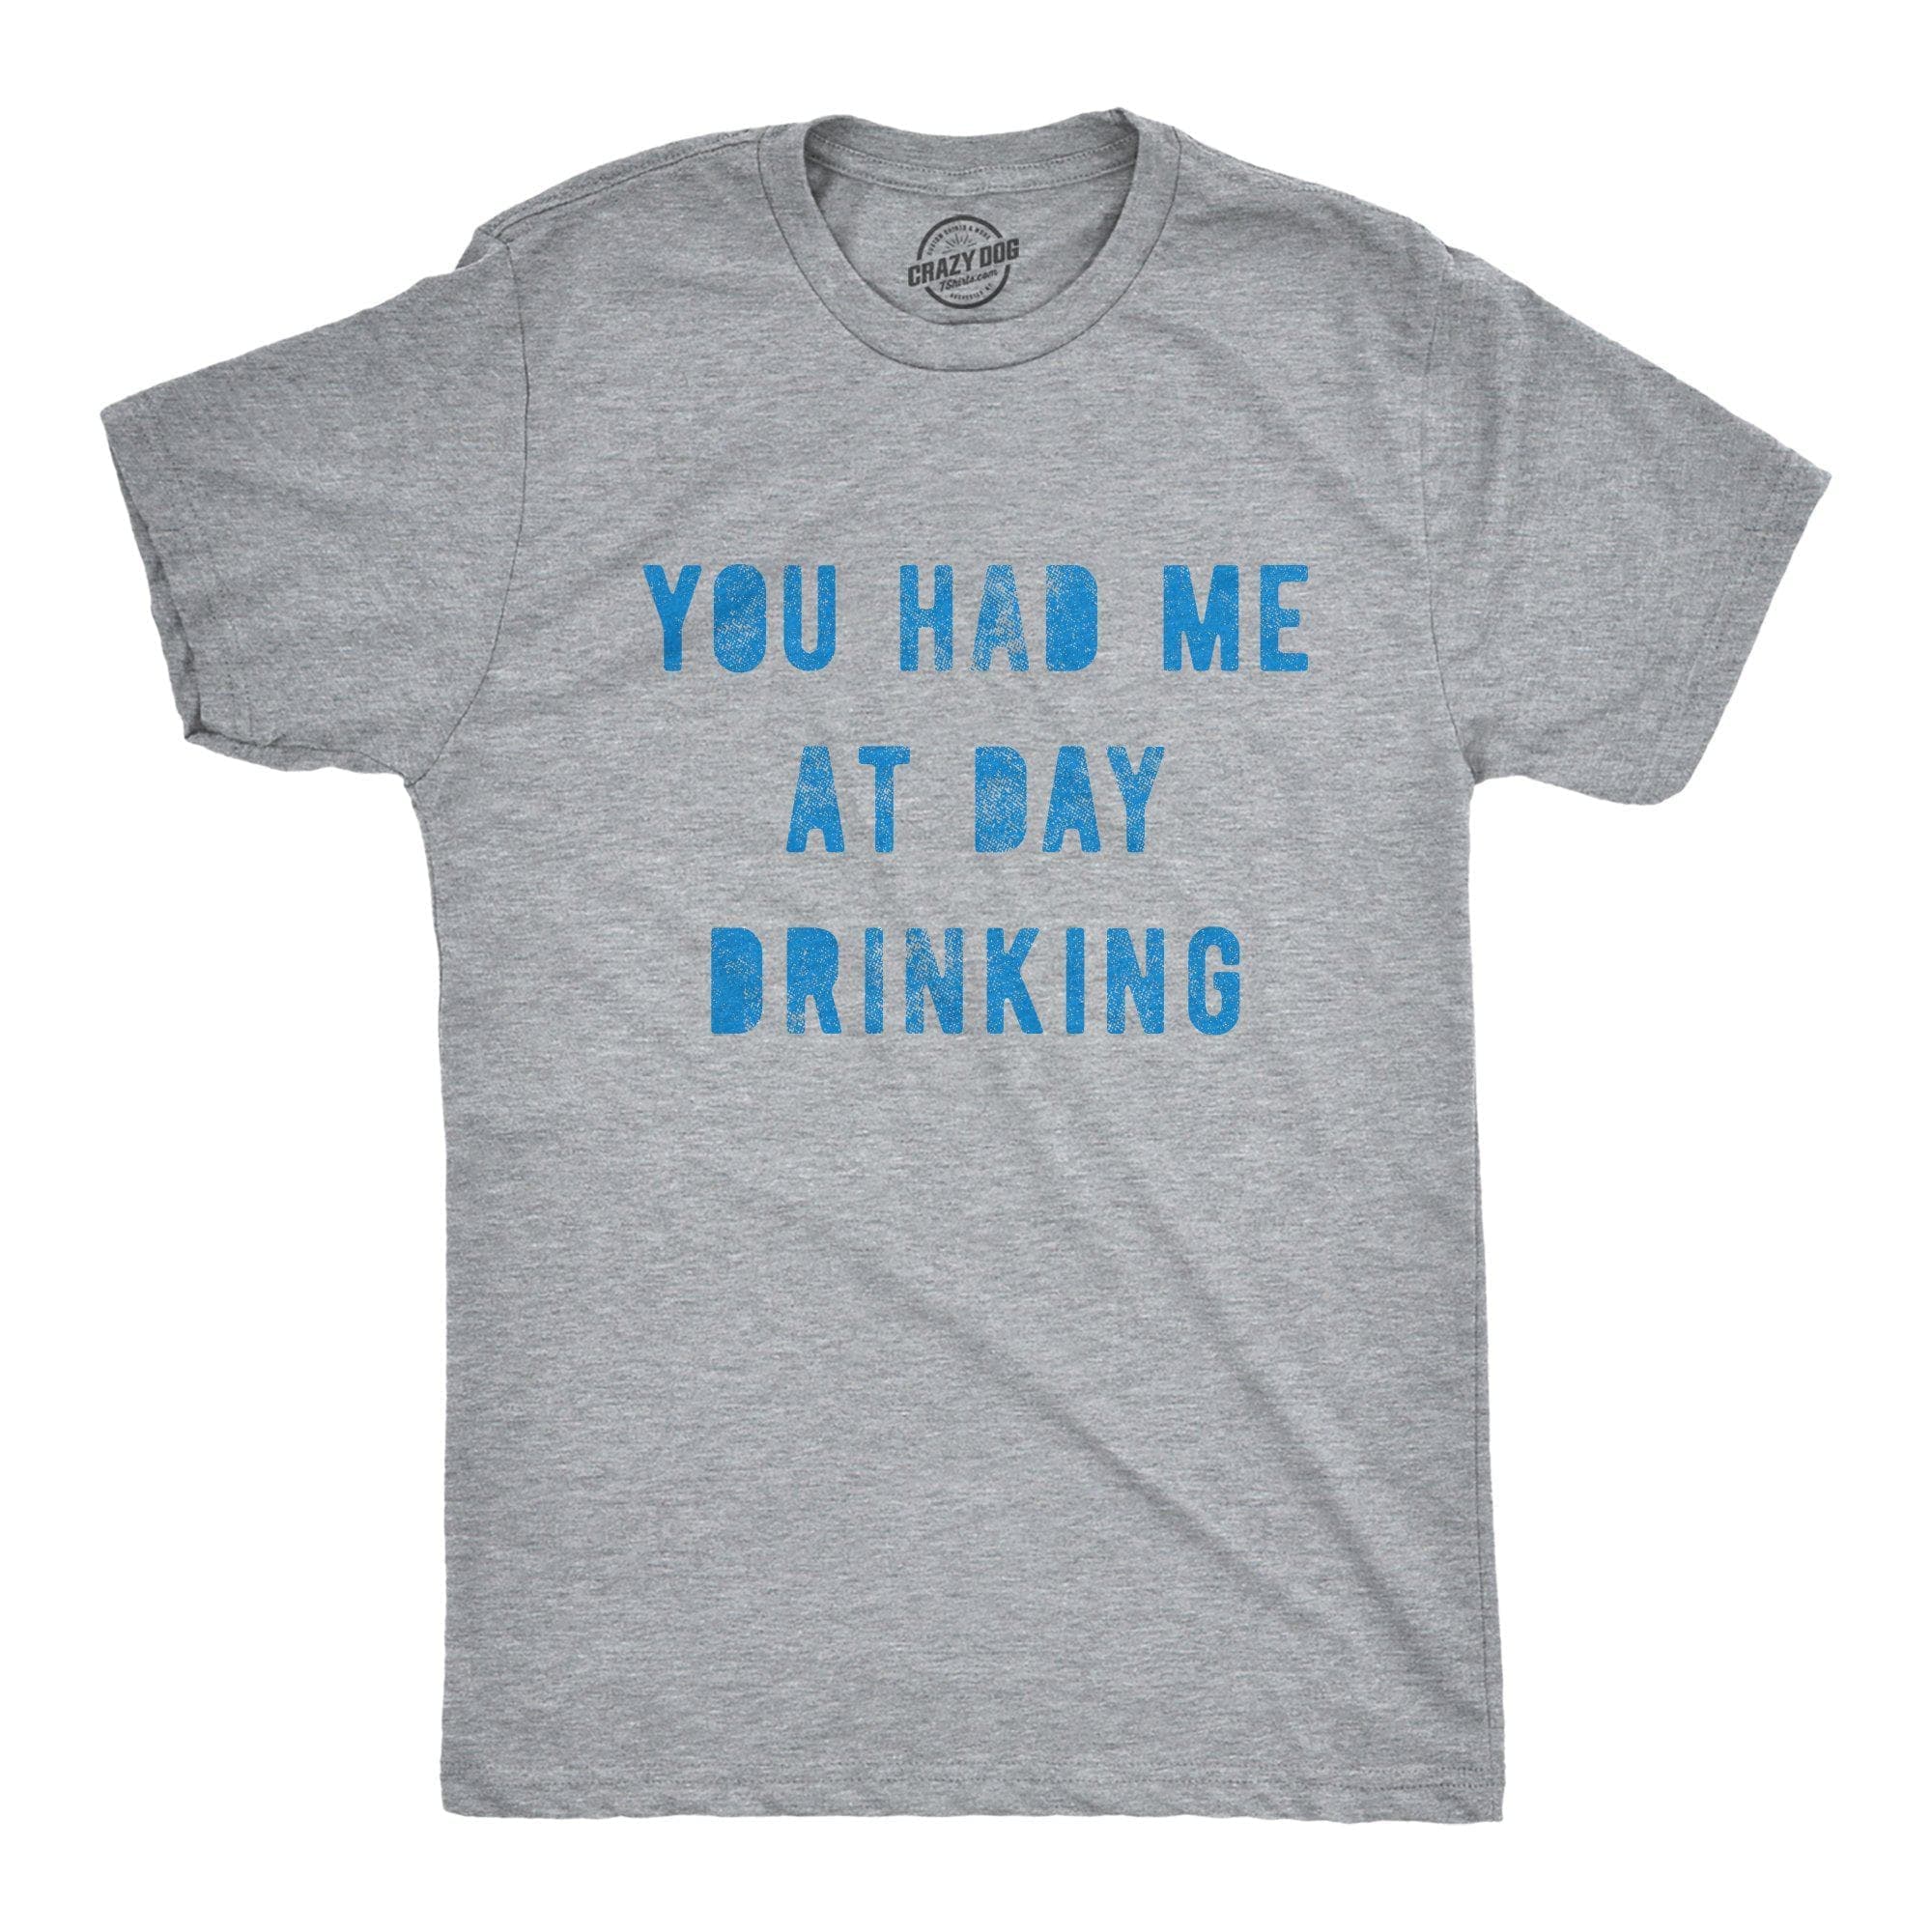 You Had Me At Day Drinking Men's Tshirt - Crazy Dog T-Shirts